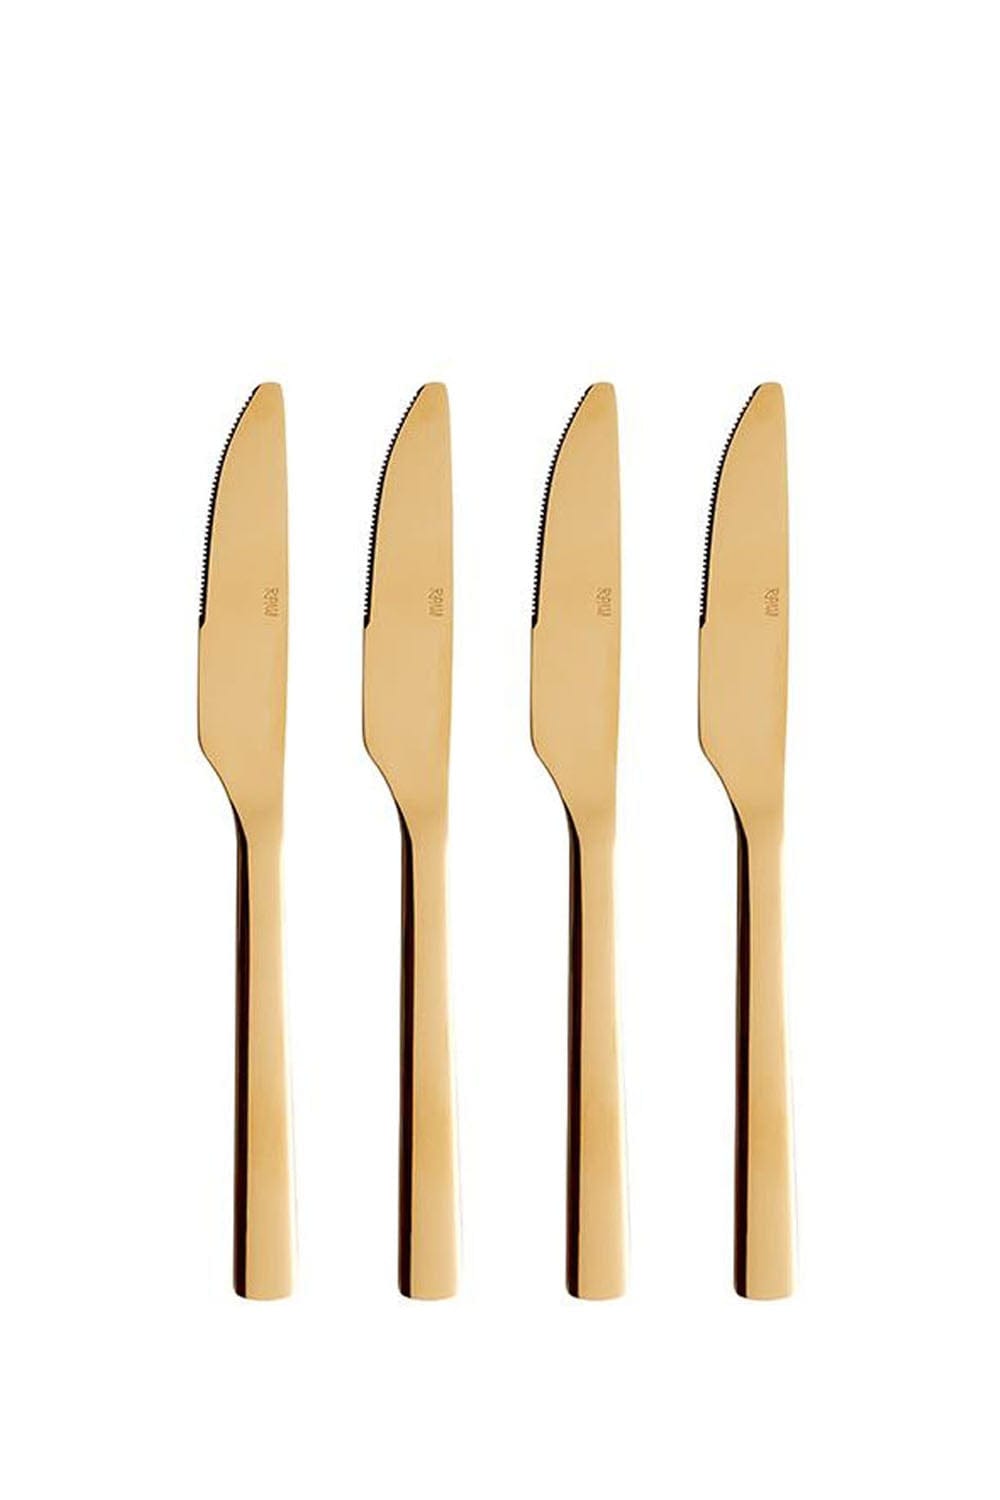 Aida Raw Set Of 4 Knives Gold Coating  Ss Comes In A Giftbox